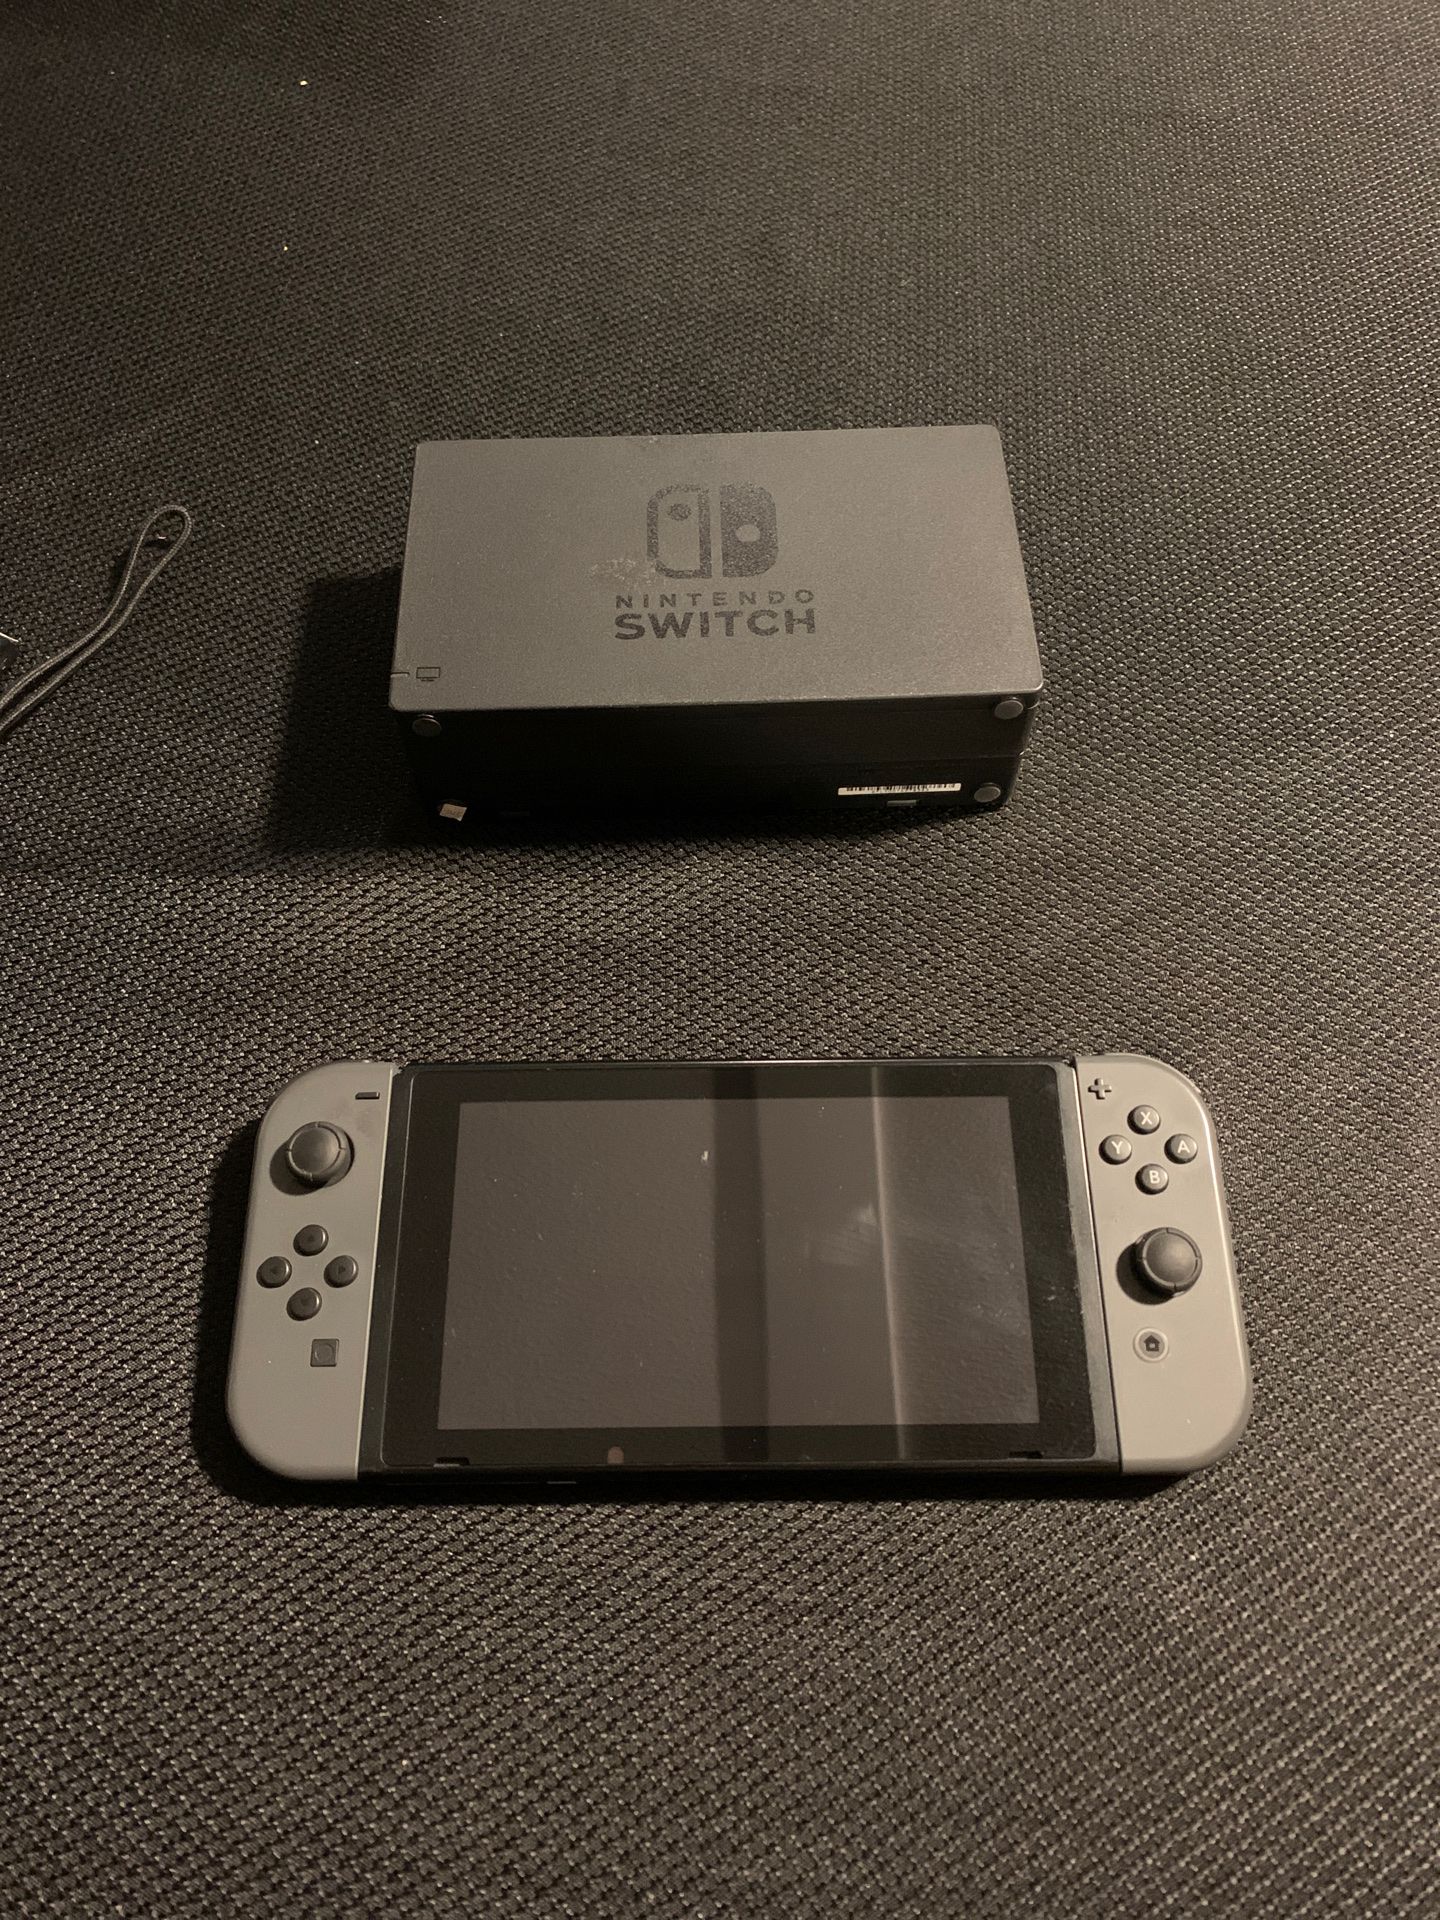 Nintendo Switch w games downloaded